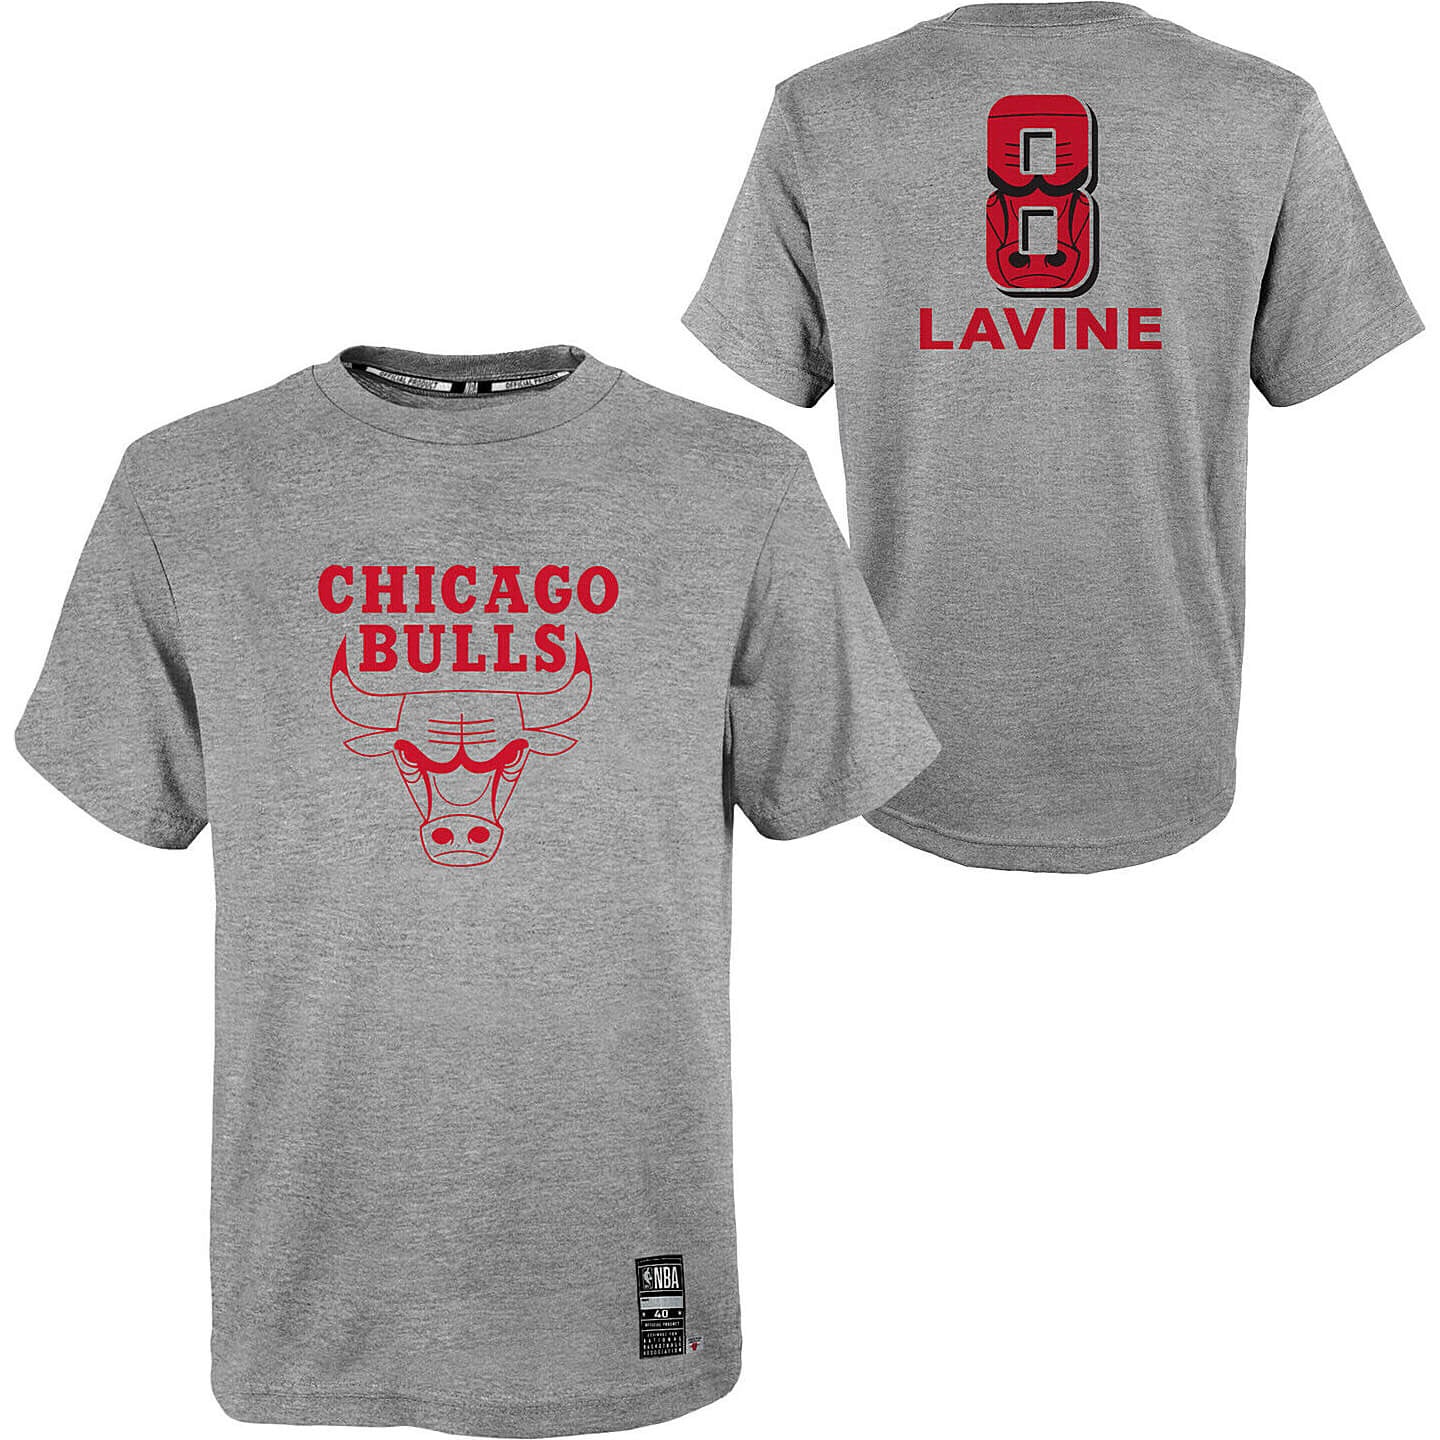 Outer Stuff By The Numbers Ss Tee Chicago Bulls Lavine Zach Grey